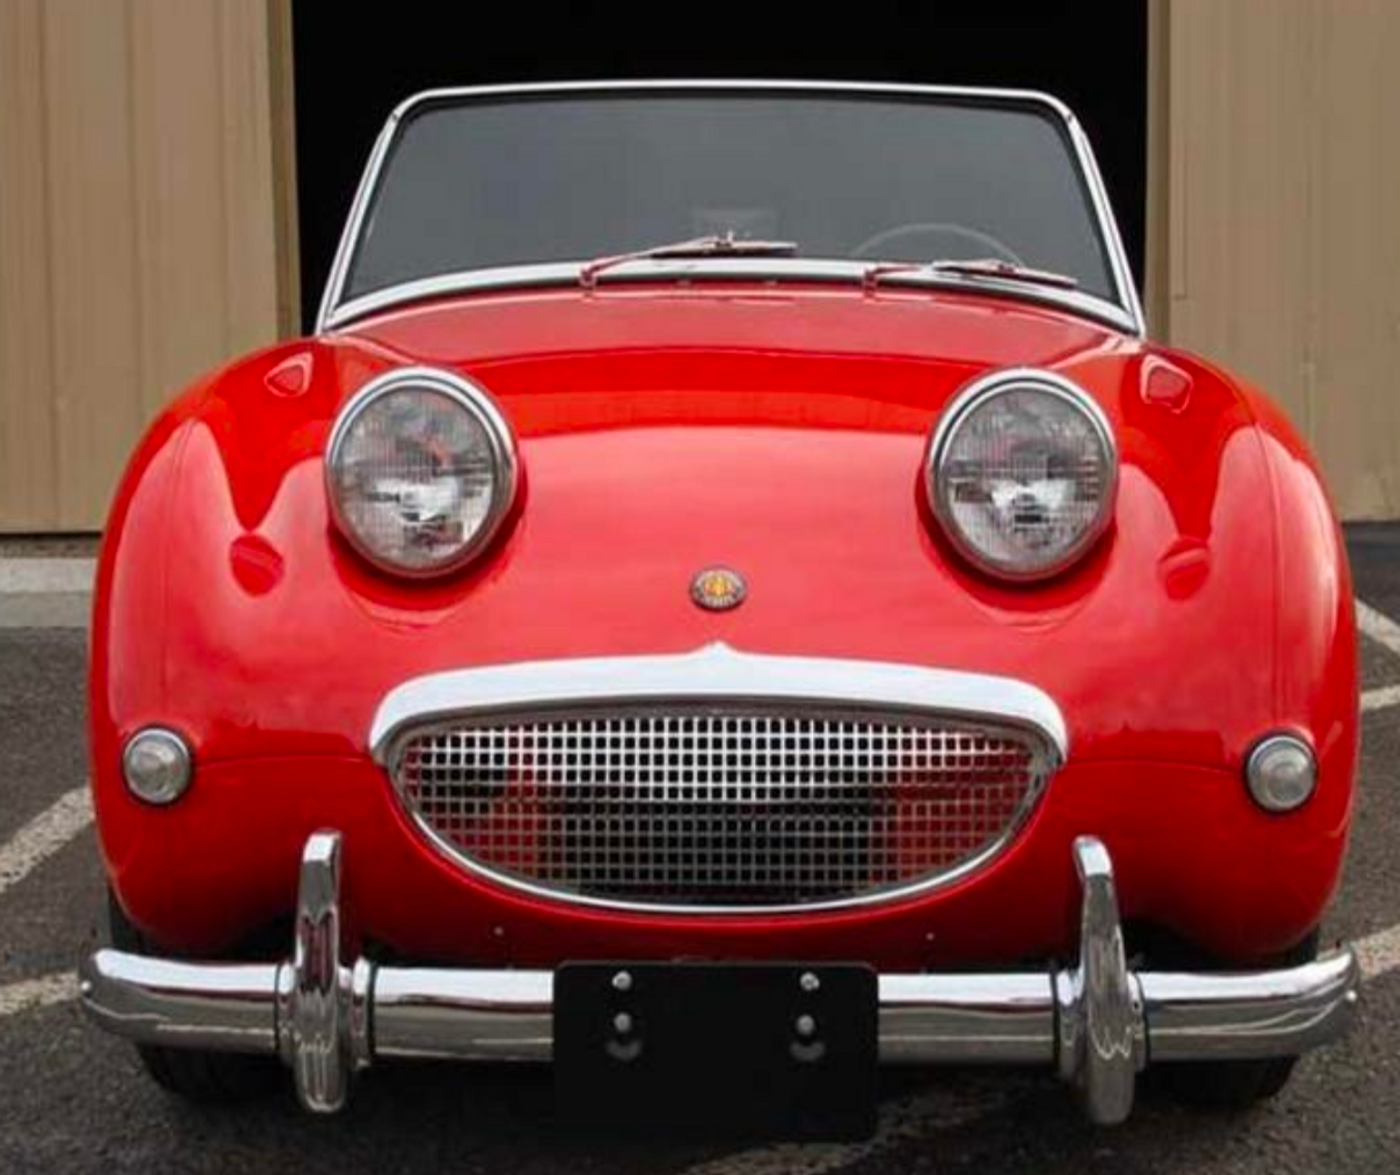 An example of a car's grille that looks like it has eyes and a mouth, despite not being designed to have a face.